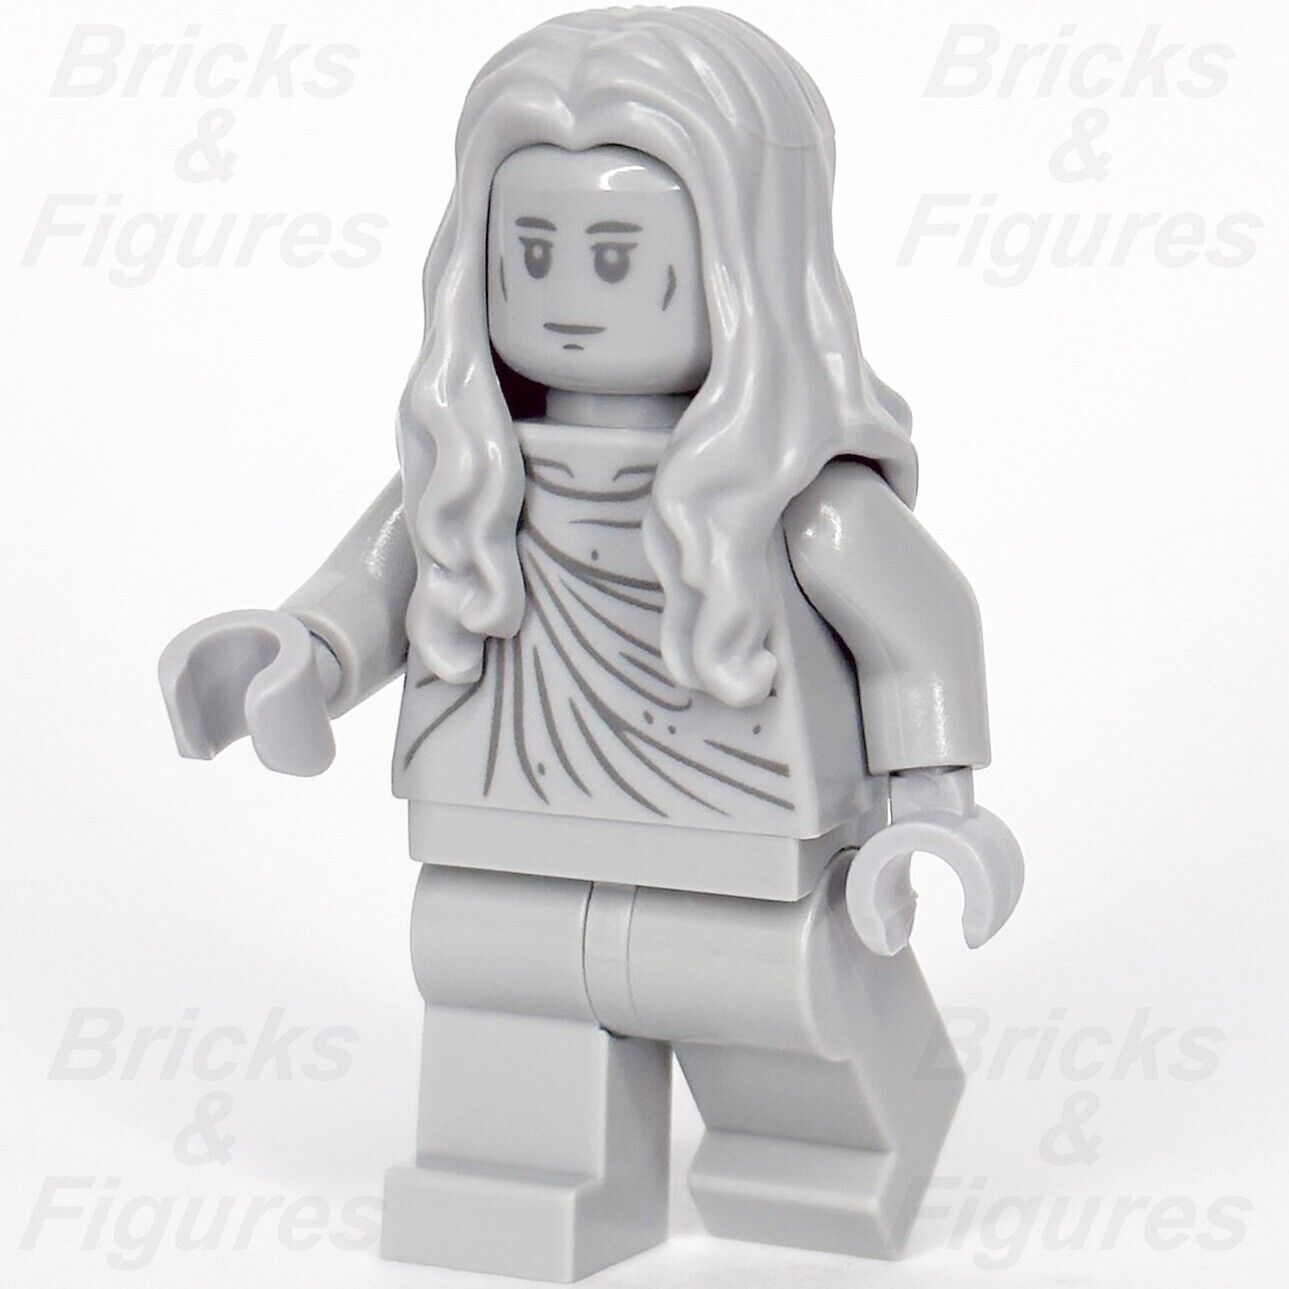 LEGO Elf Statue Minifigure The Hobbit & The Lord of the Rings 10316 lor115 LOTR